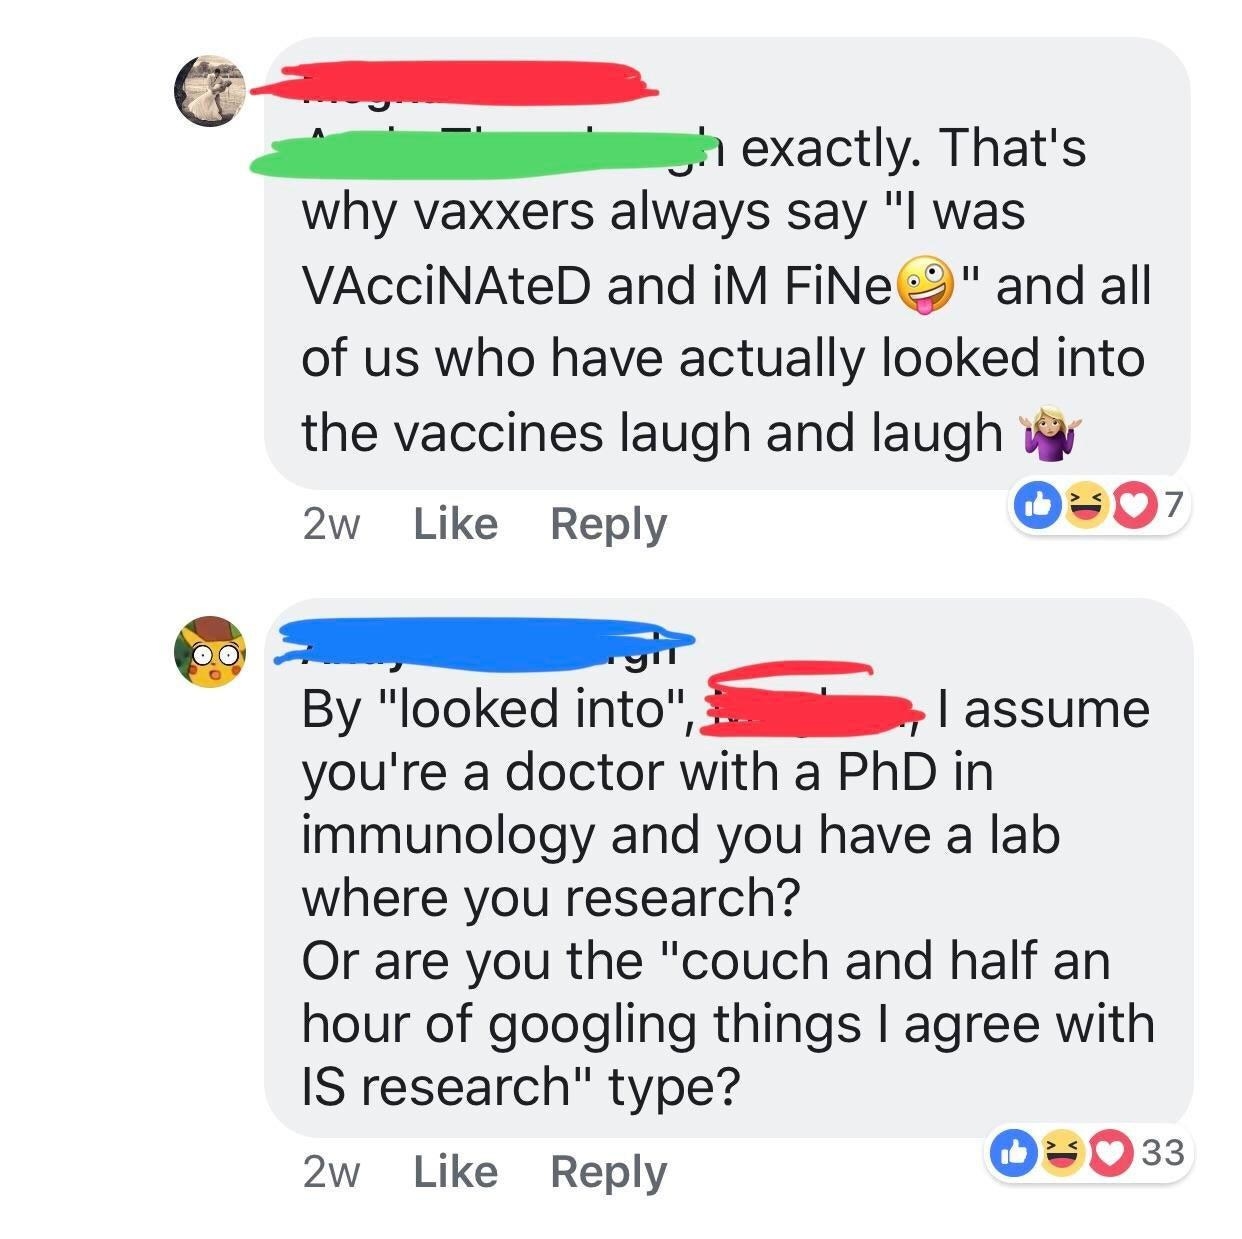 &quot;That&#x27;s why vaxxers always say &#x27;I was vaccinated and I&#x27;m fine&#x27; and all of us who have actually looked into the vaccines laugh and laugh&quot; Response: By &quot;looked into,&quot; I assume you&#x27;re a doctor with a PhD in immunology and you have a lab where you research?